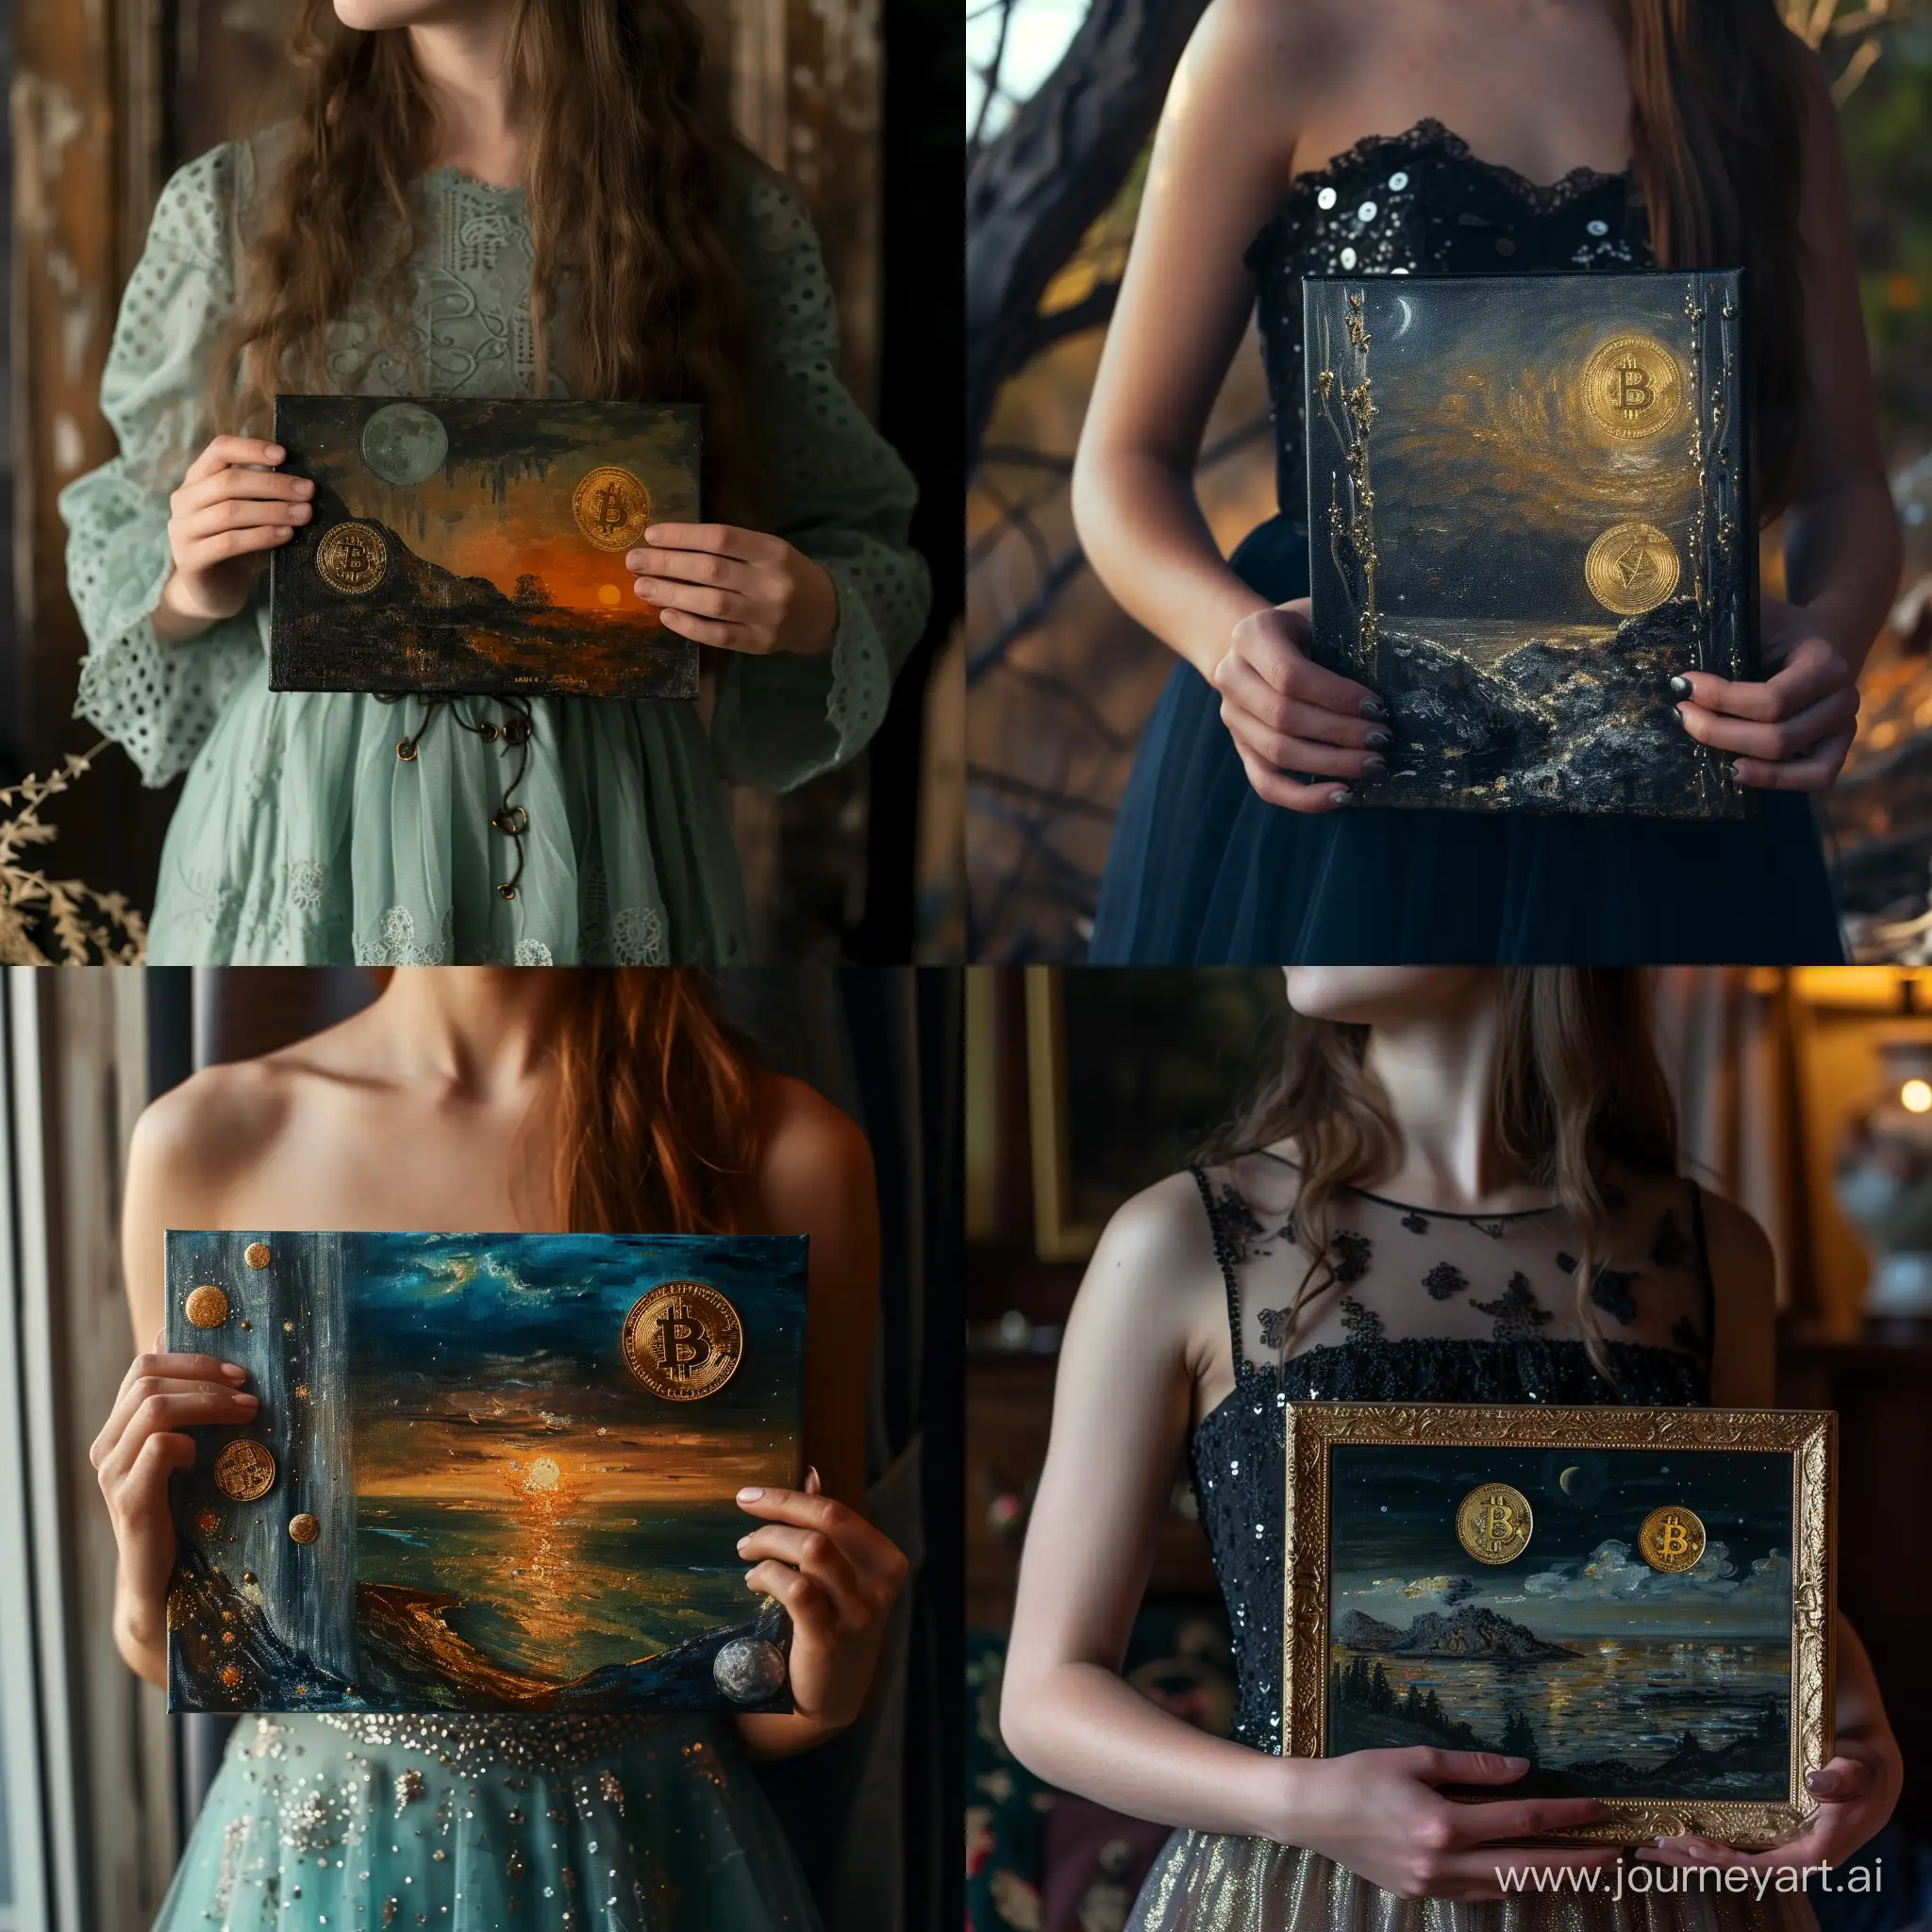 Girl-Holding-Cryptocurrency-Oil-Painting-at-Moonset